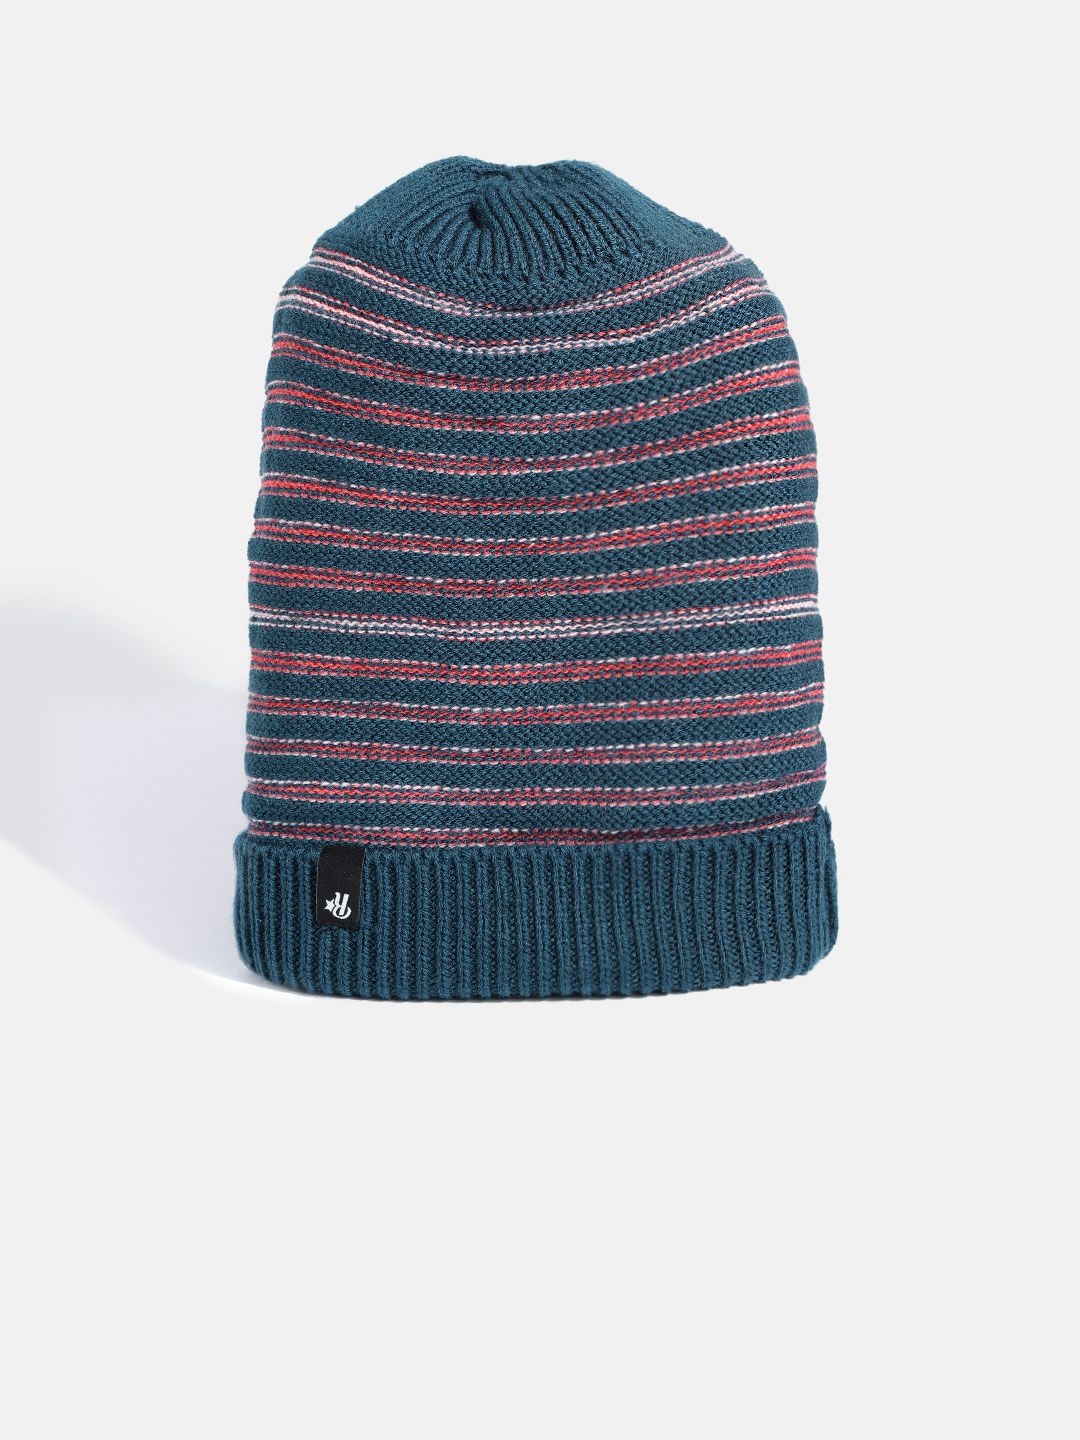 The Roadster Lifestyle Co Unisex Teal Green & Pink Striped Beanie Price in India